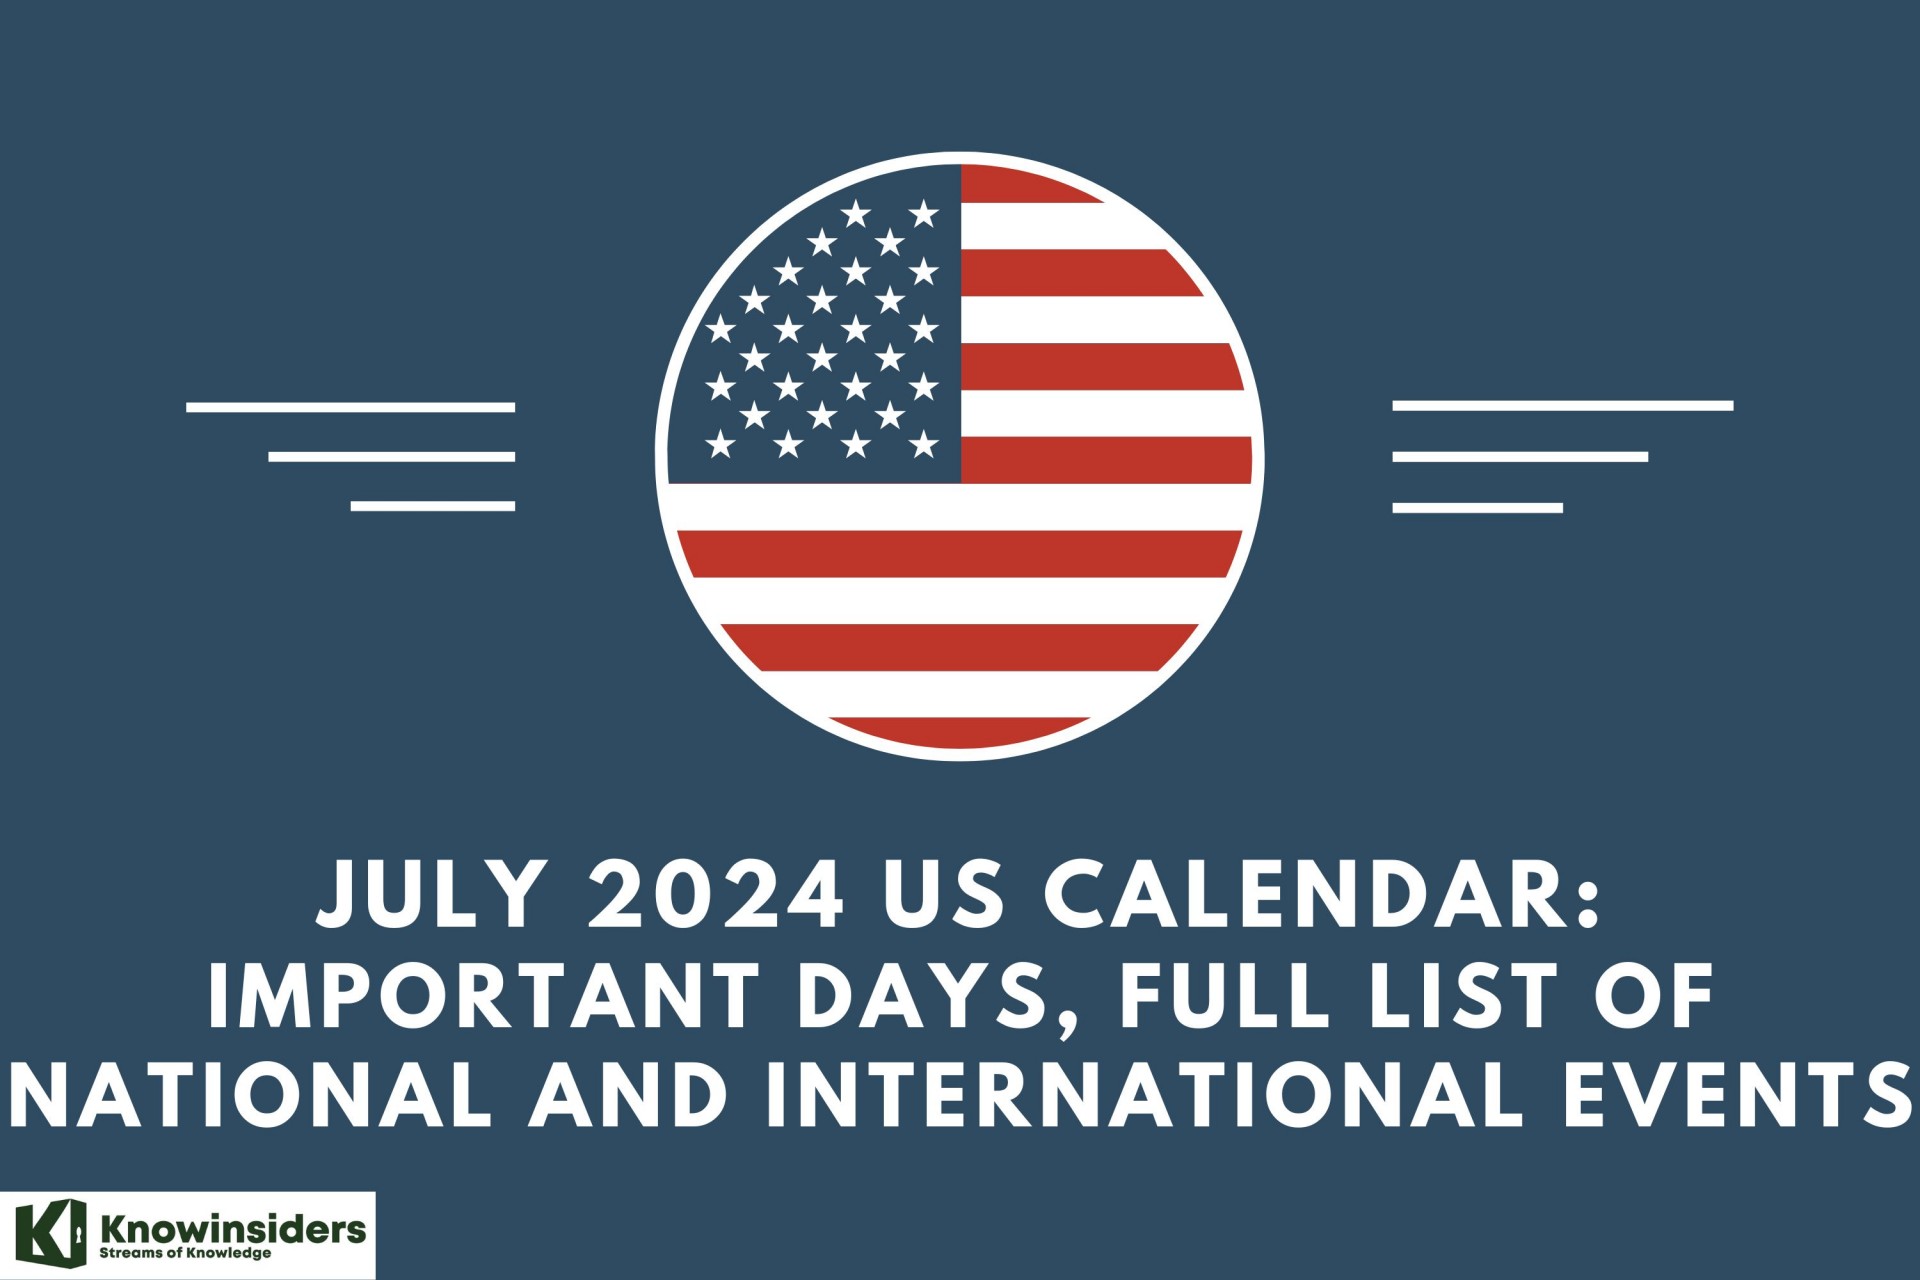 July 2024 USA Calendar: Special Days, Full List of National Holidays and International Events